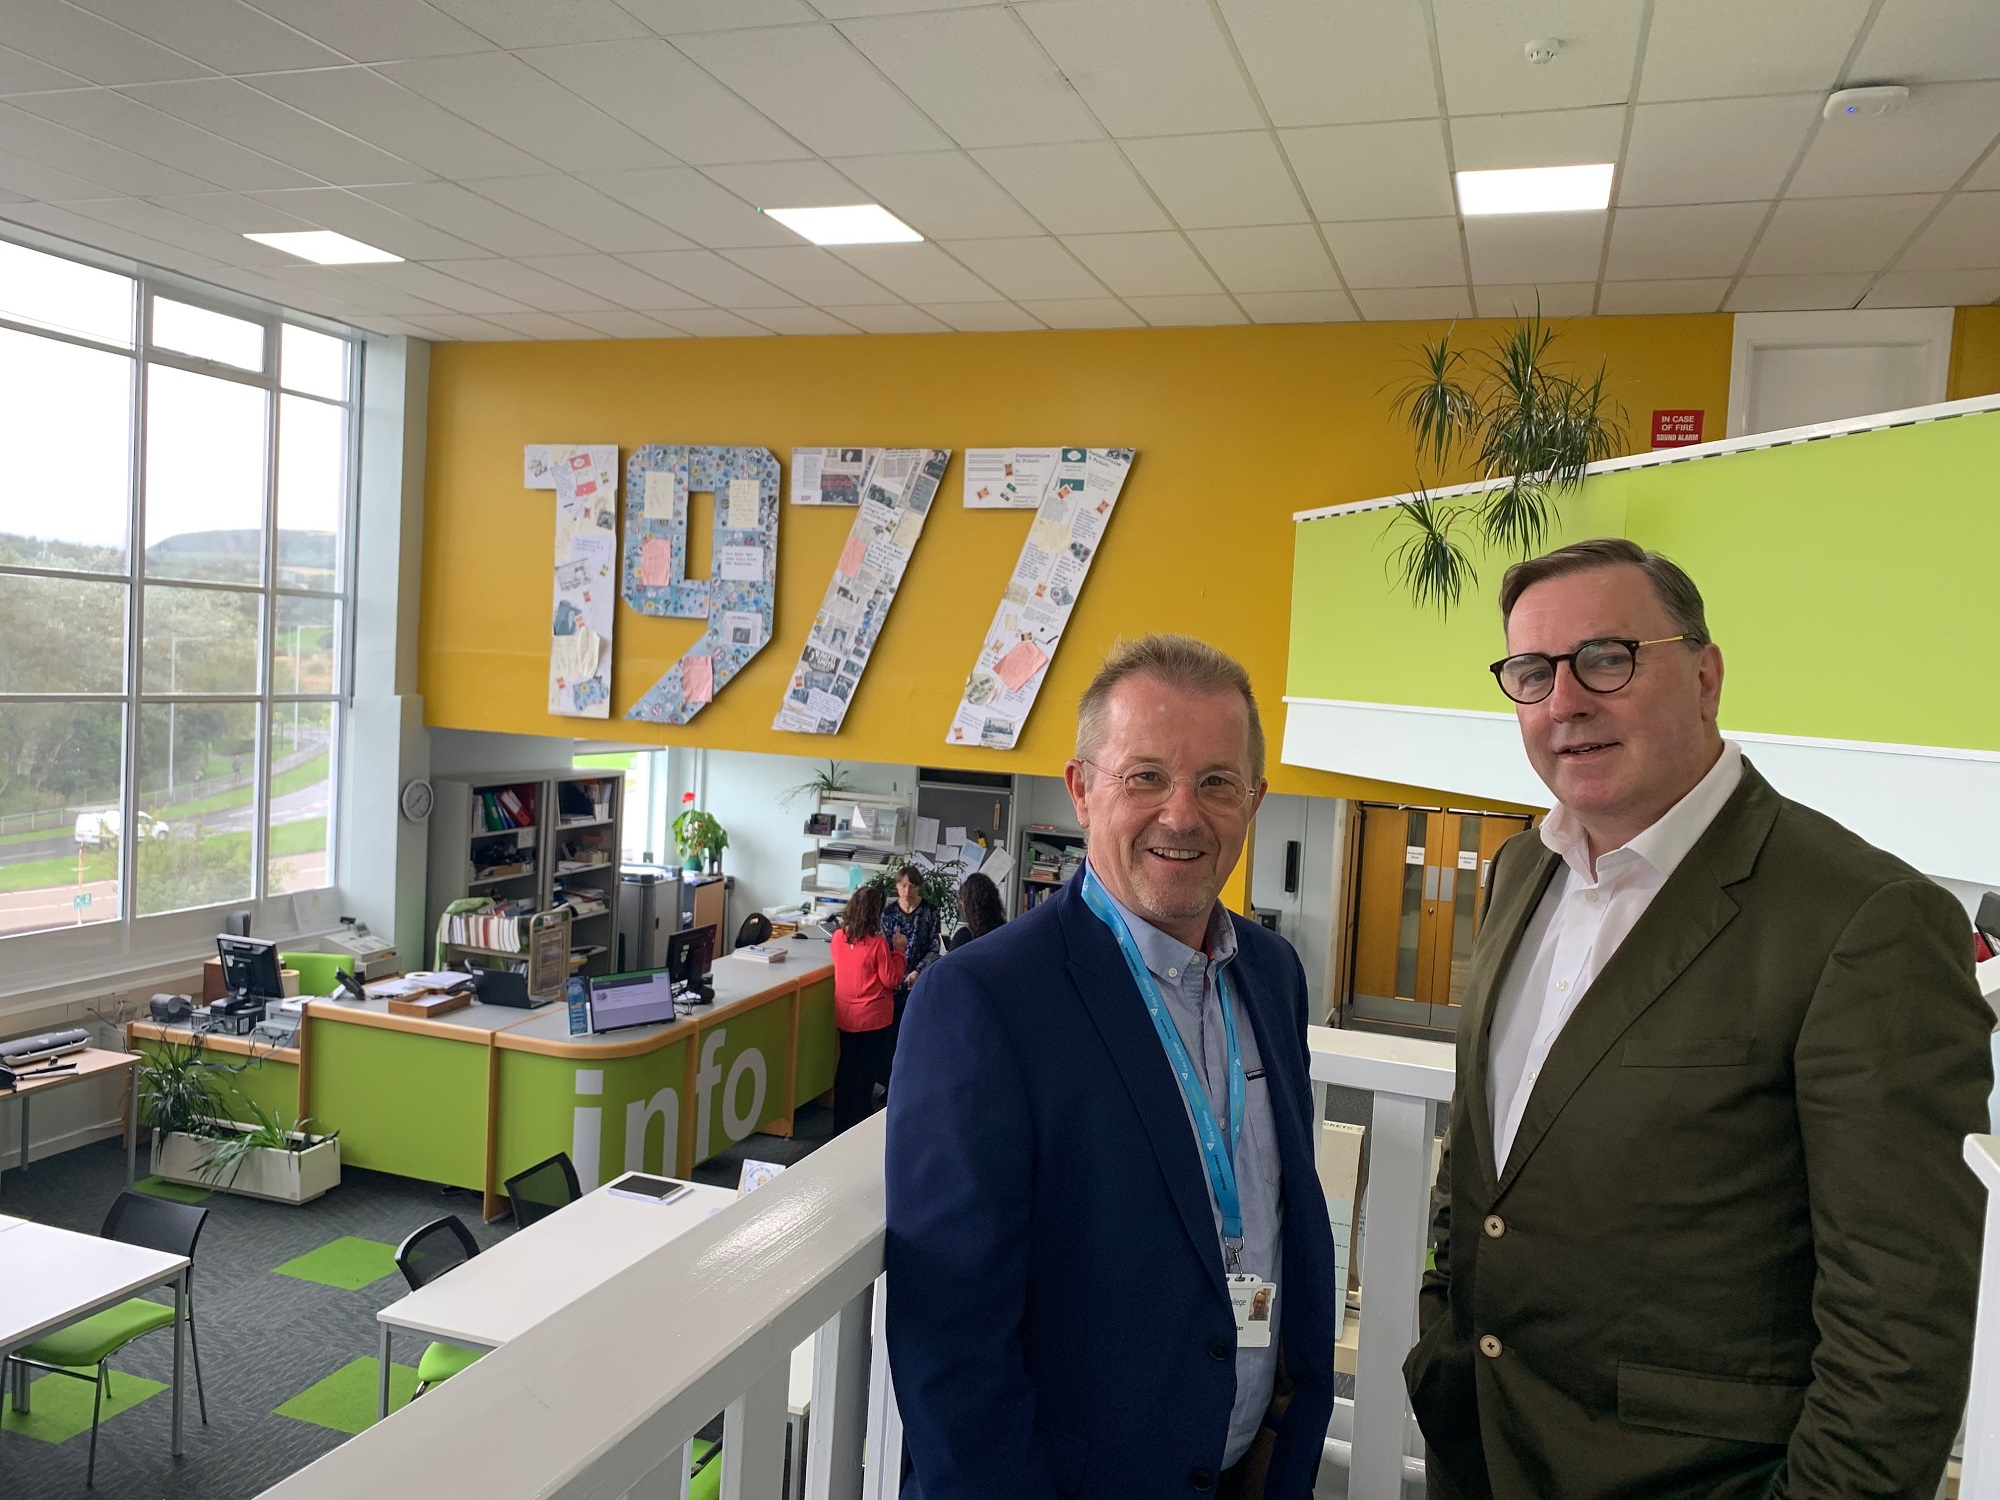 Skids Collage is centre piece of College’s upgraded Dunfermline Campus library 